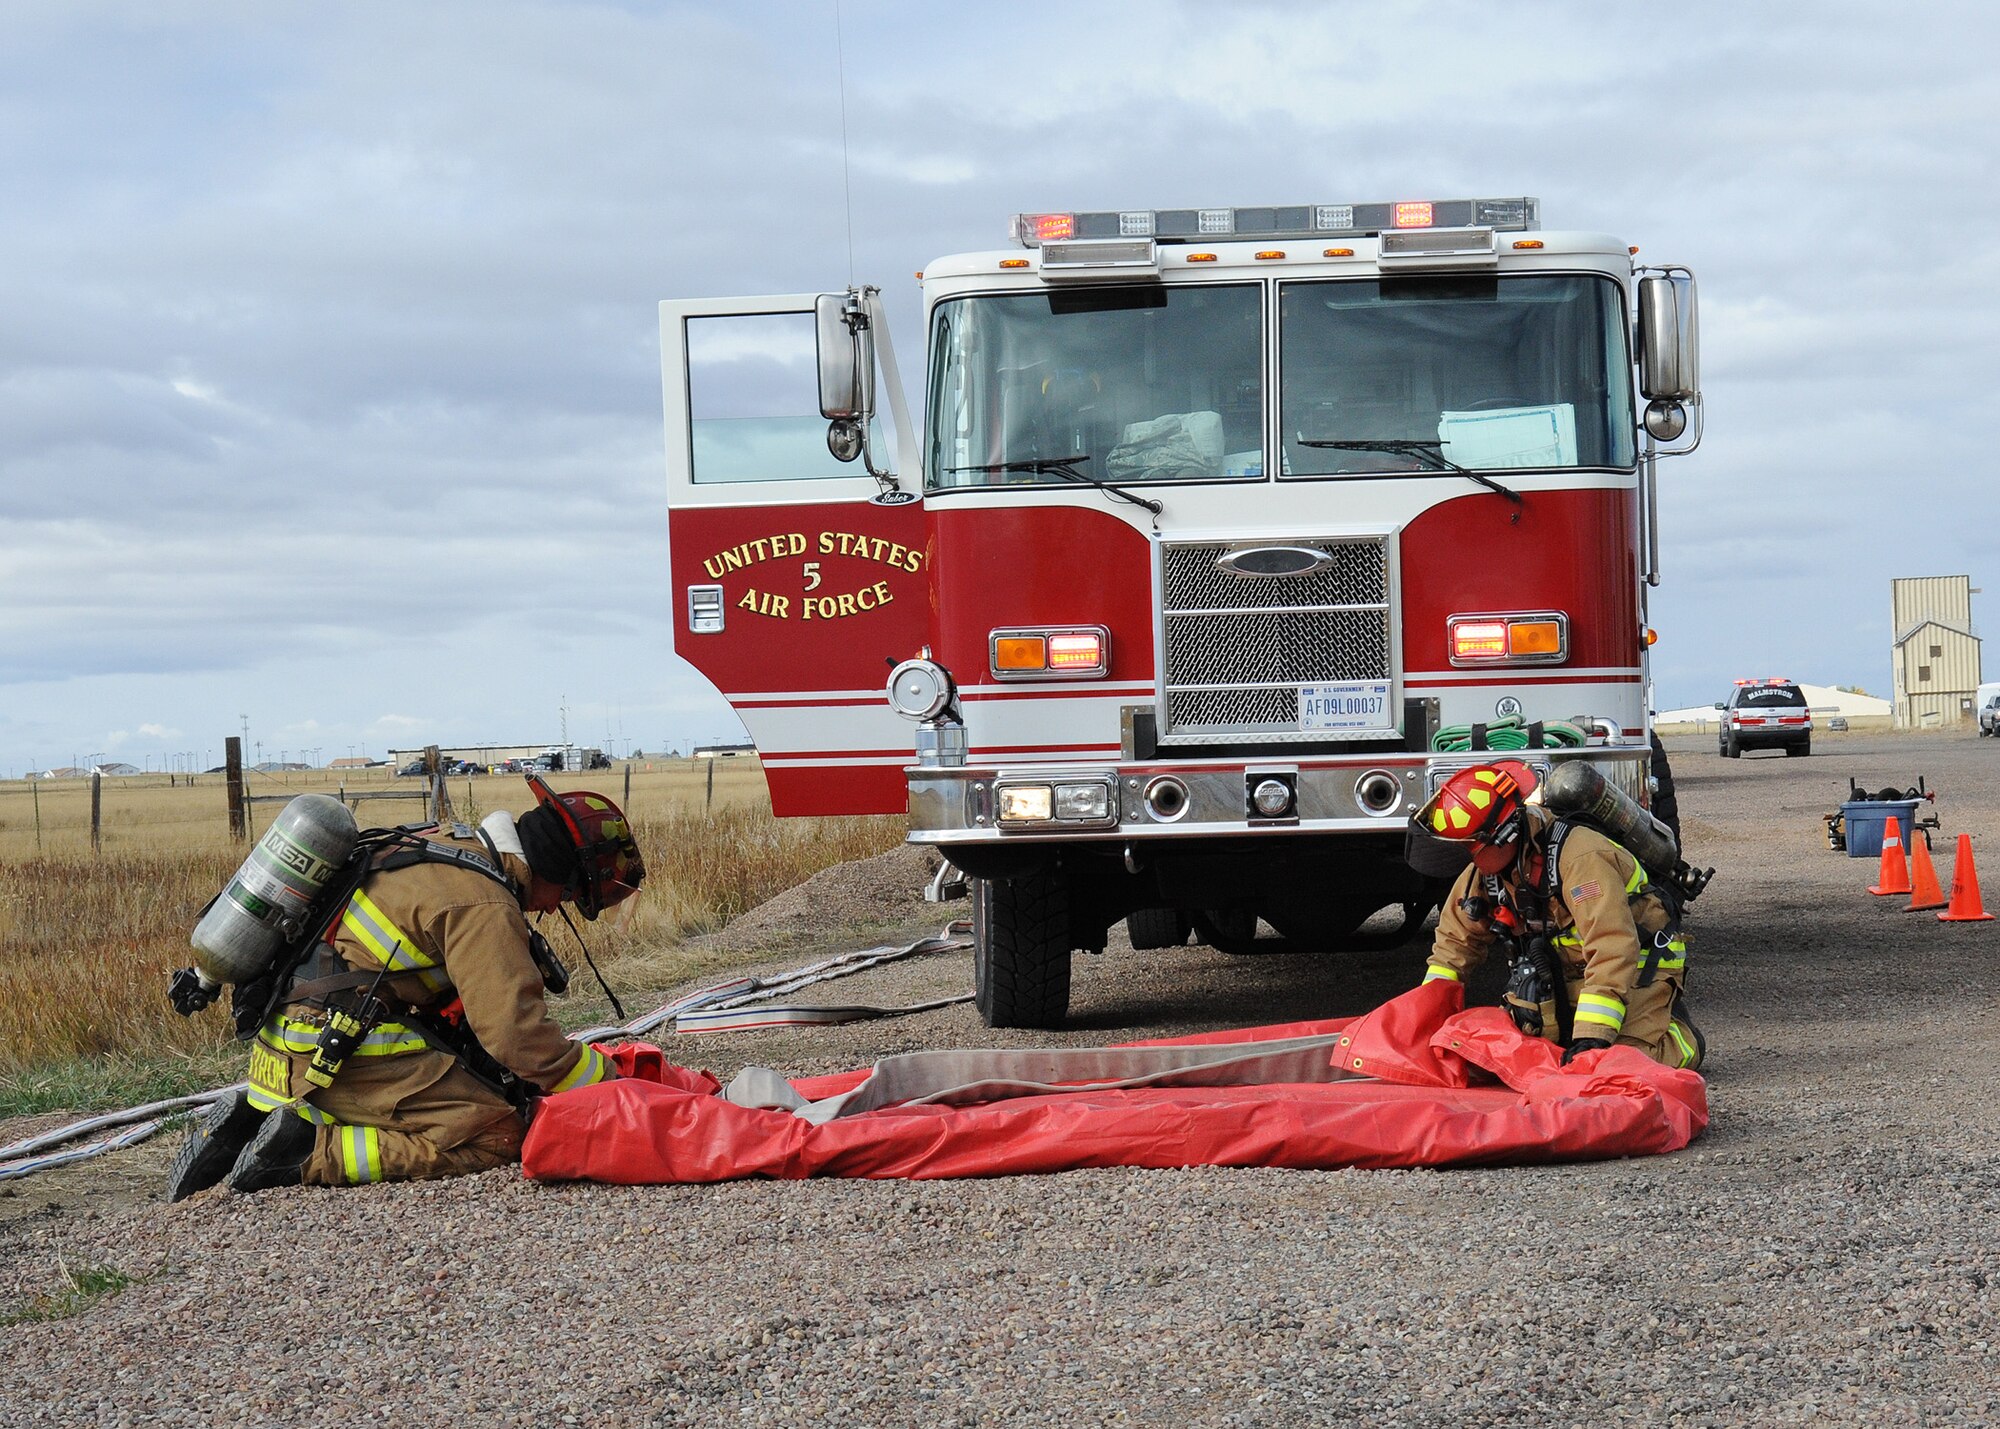 Firefighters from the Malmstrom Air Force Base Fire Department work together to set up a secondary decontamination wash station during an exercise at the base Oct. 27, 2014.  The exercise was part of Global Thunder 15, a U.S. Strategic Command annual field training and battle staff exercise designed to exercise all mission areas with primary emphasis on nuclear command, control and communications. This field training and battle staff exercise provides training opportunities for components, task forces, units, and command posts to deter and, if necessary, defeat a military attack against the United States and to employ forces as directed by the president. (U.S. Air Force photo/Christy Mason)